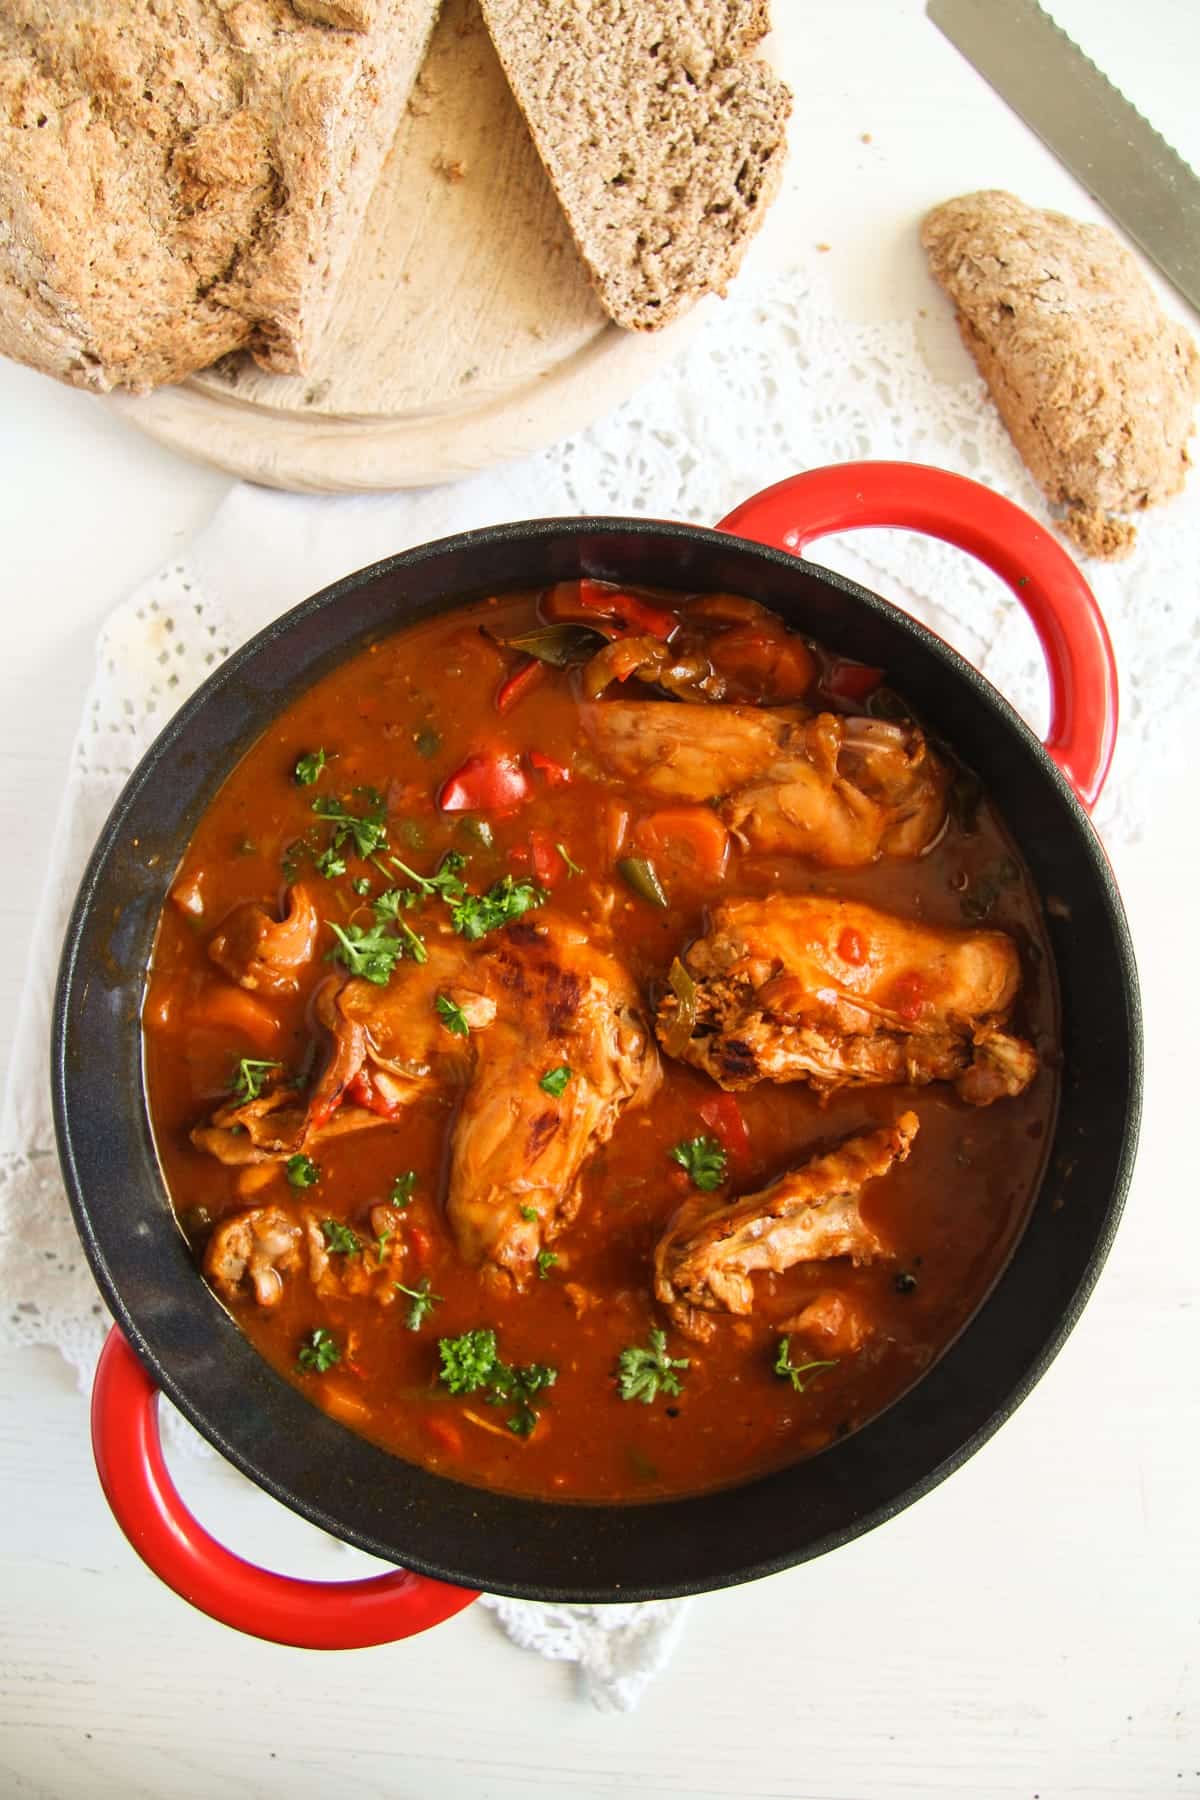 overhead view of a pot with stewed rabbit in red sauce served with rustic bread.